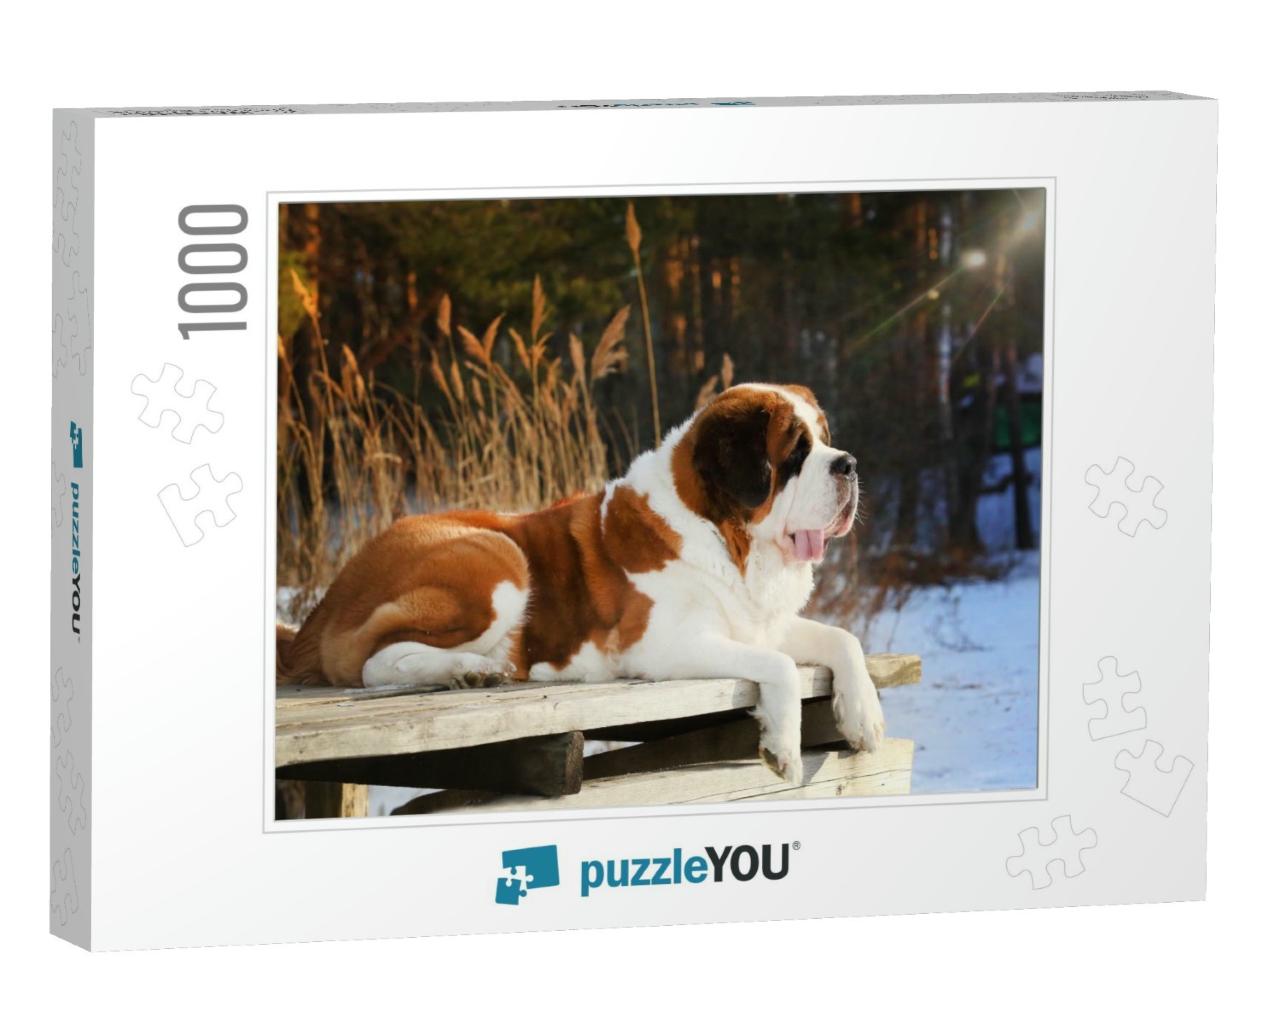 Purebred Dog Saint Bernard Lies on a Wooden Pier in the W... Jigsaw Puzzle with 1000 pieces